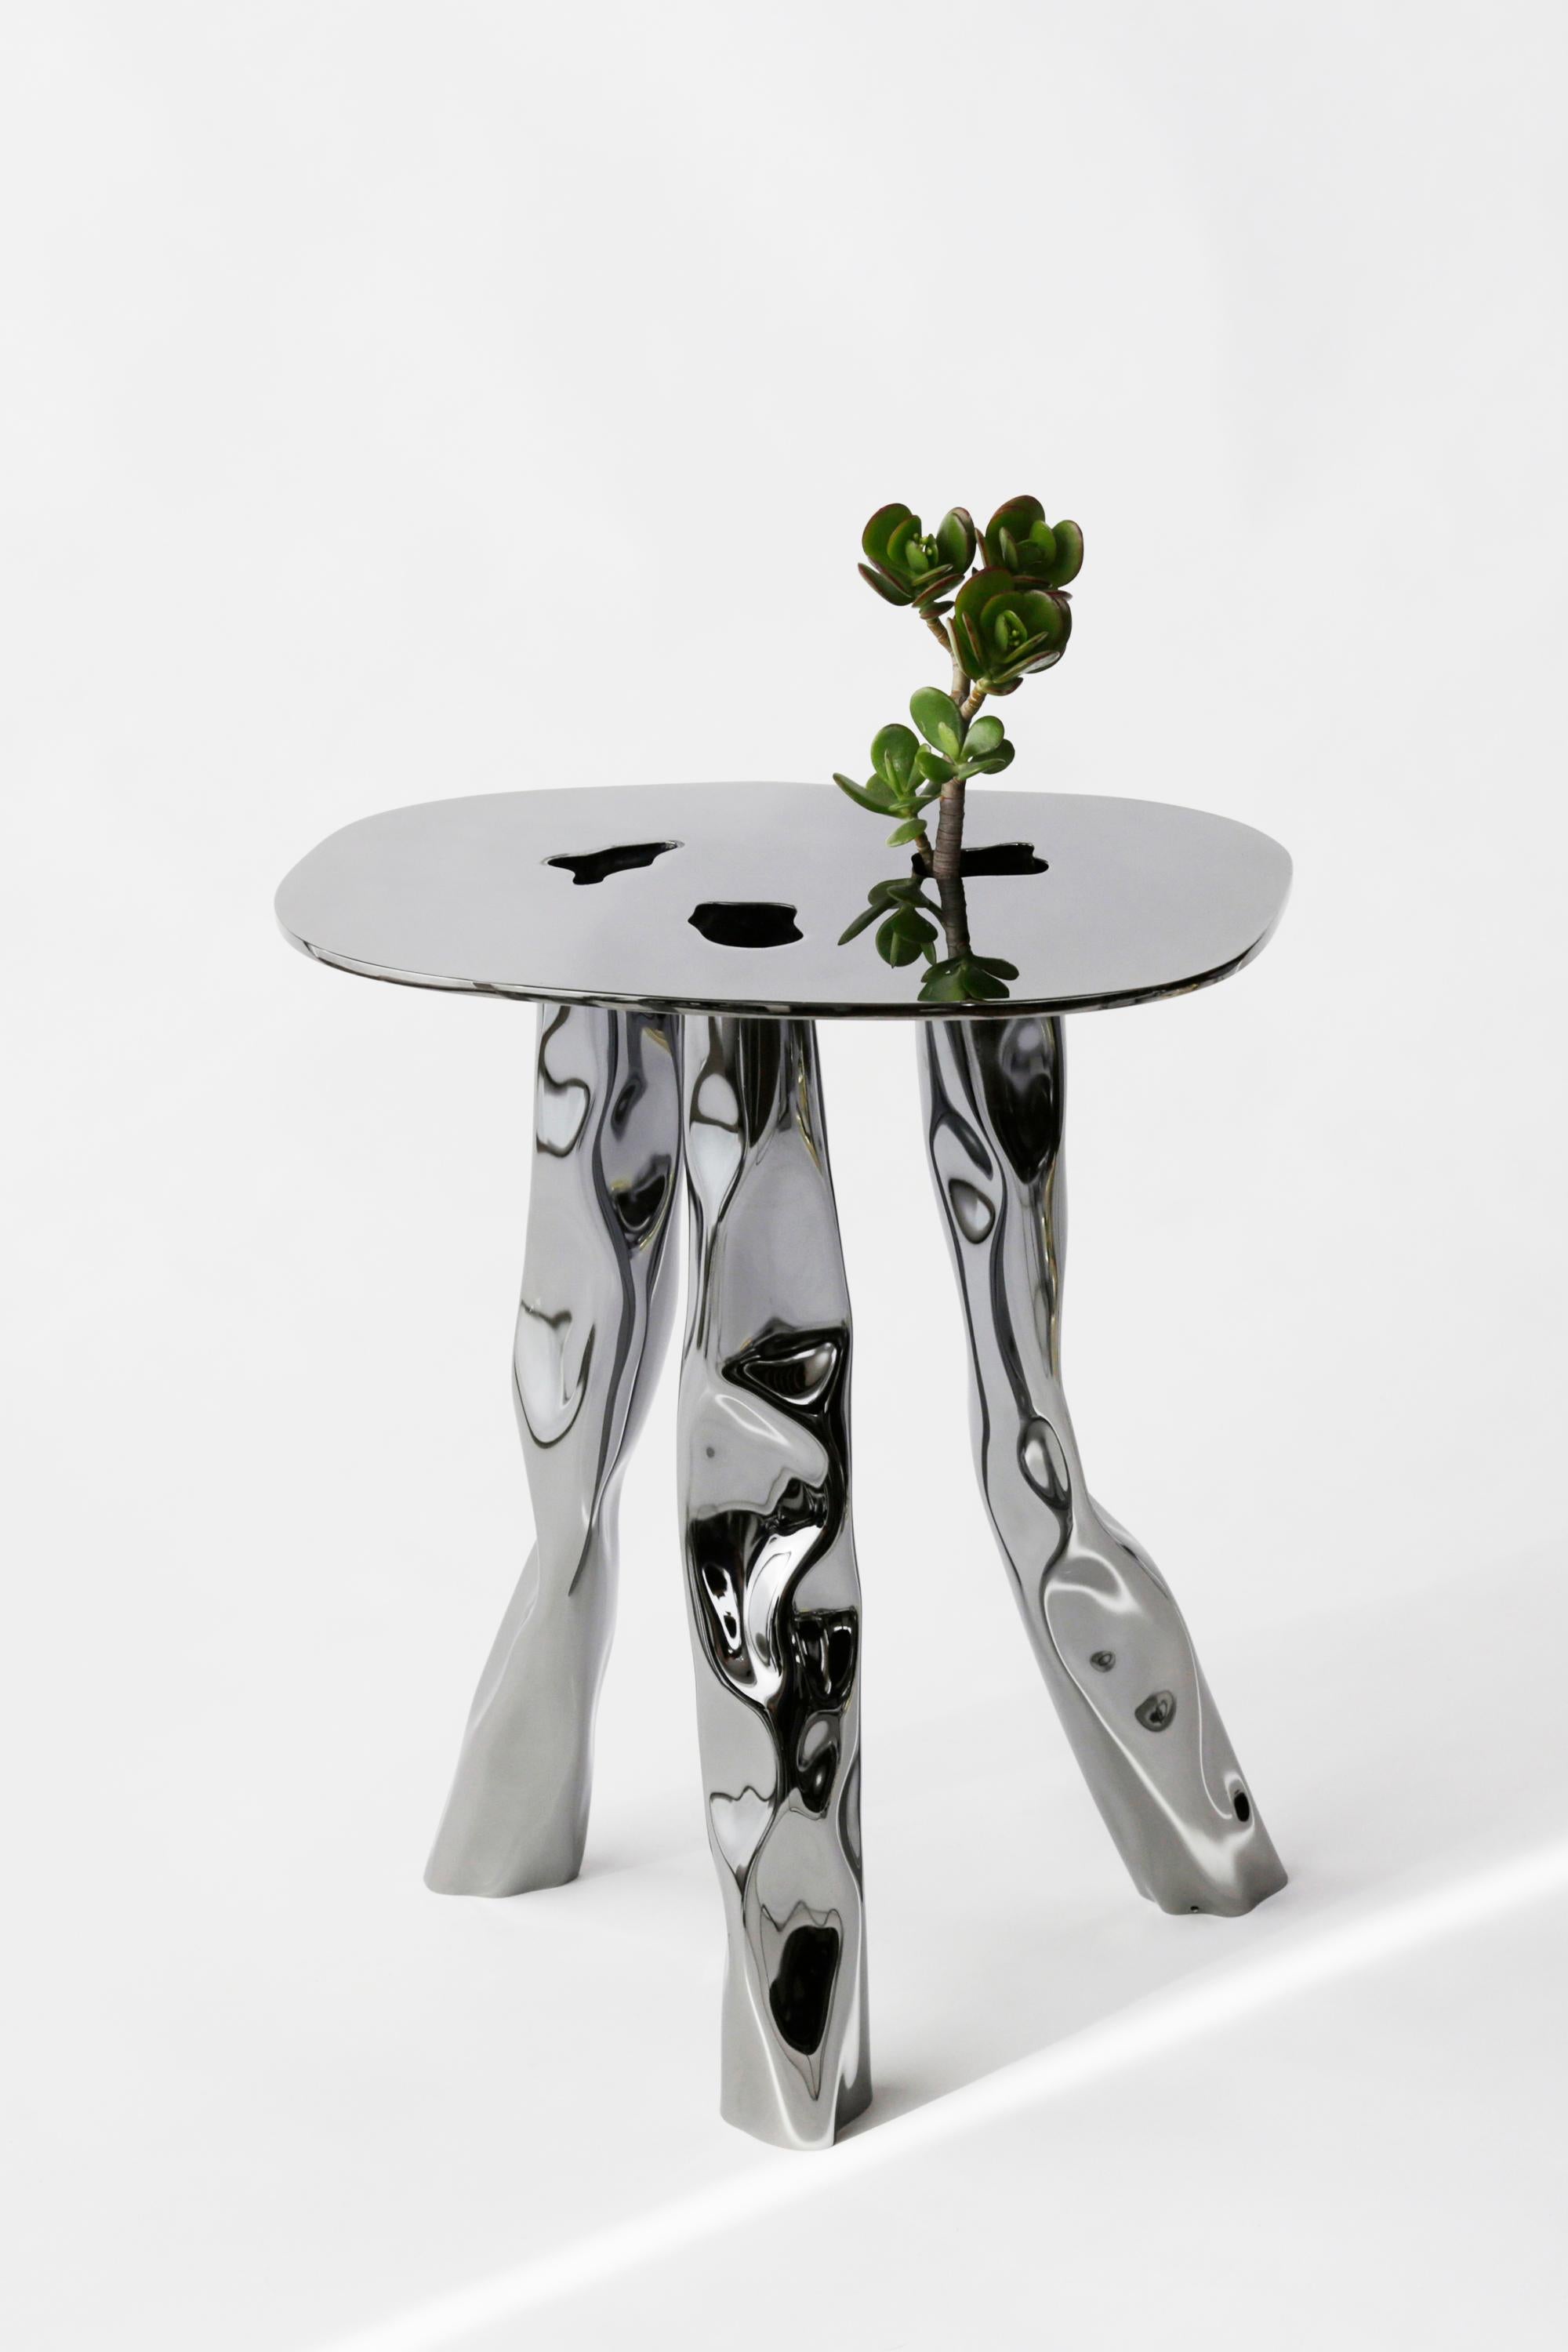 Commissioned by Etage Projects for Salon Art + Design, 2017. Side table made of black nickel-plated crushed brass. Handmade by Soft Baroque in London. Different sizes, shapes and finishes available.